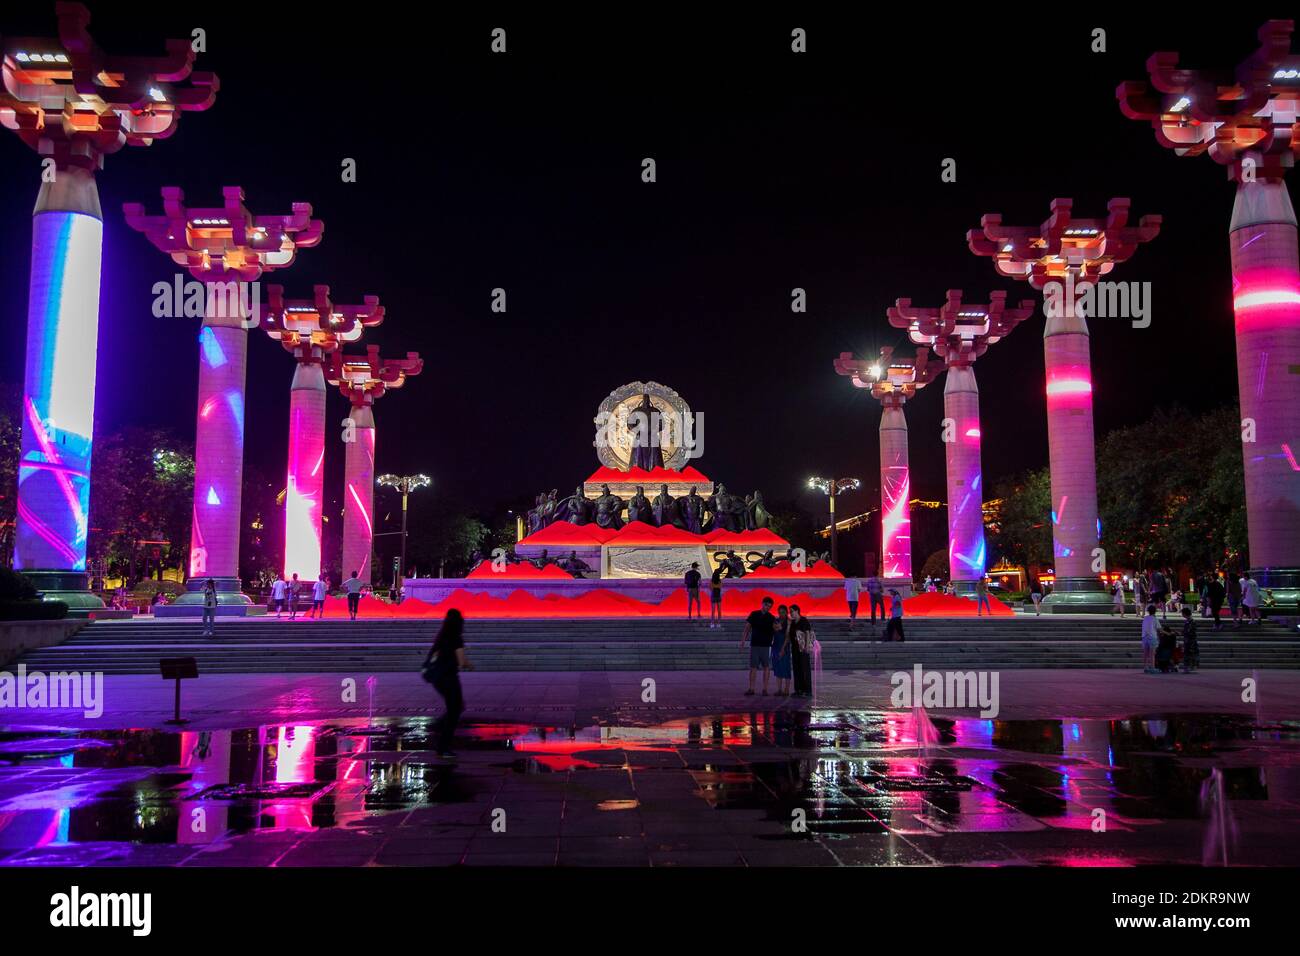 Monument with Dragon Columns to Grand Emperor Xuan Zang, the greatest emperor of the Tang Dynasty lit in evening at Xian Park Xi'an Night Stock Photo